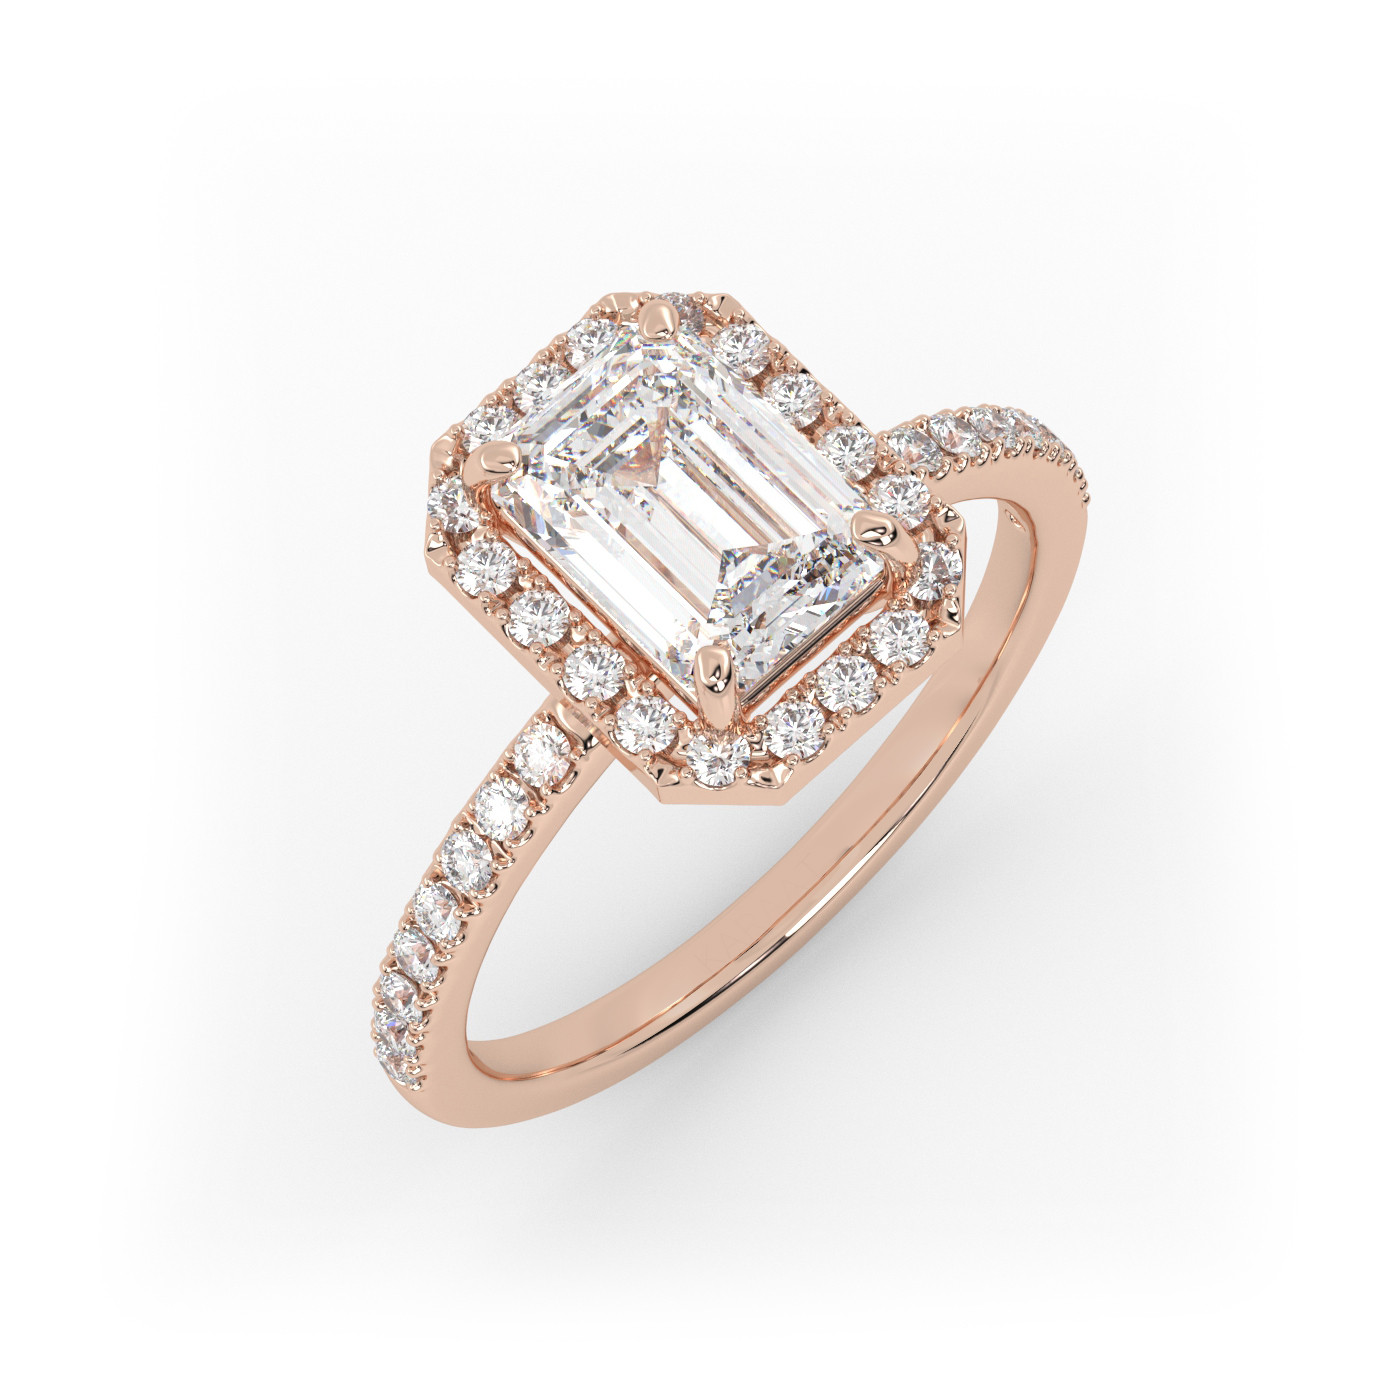 18K ROSE GOLD Emerald Diamond Engagement Ring With Pave and Halo Style